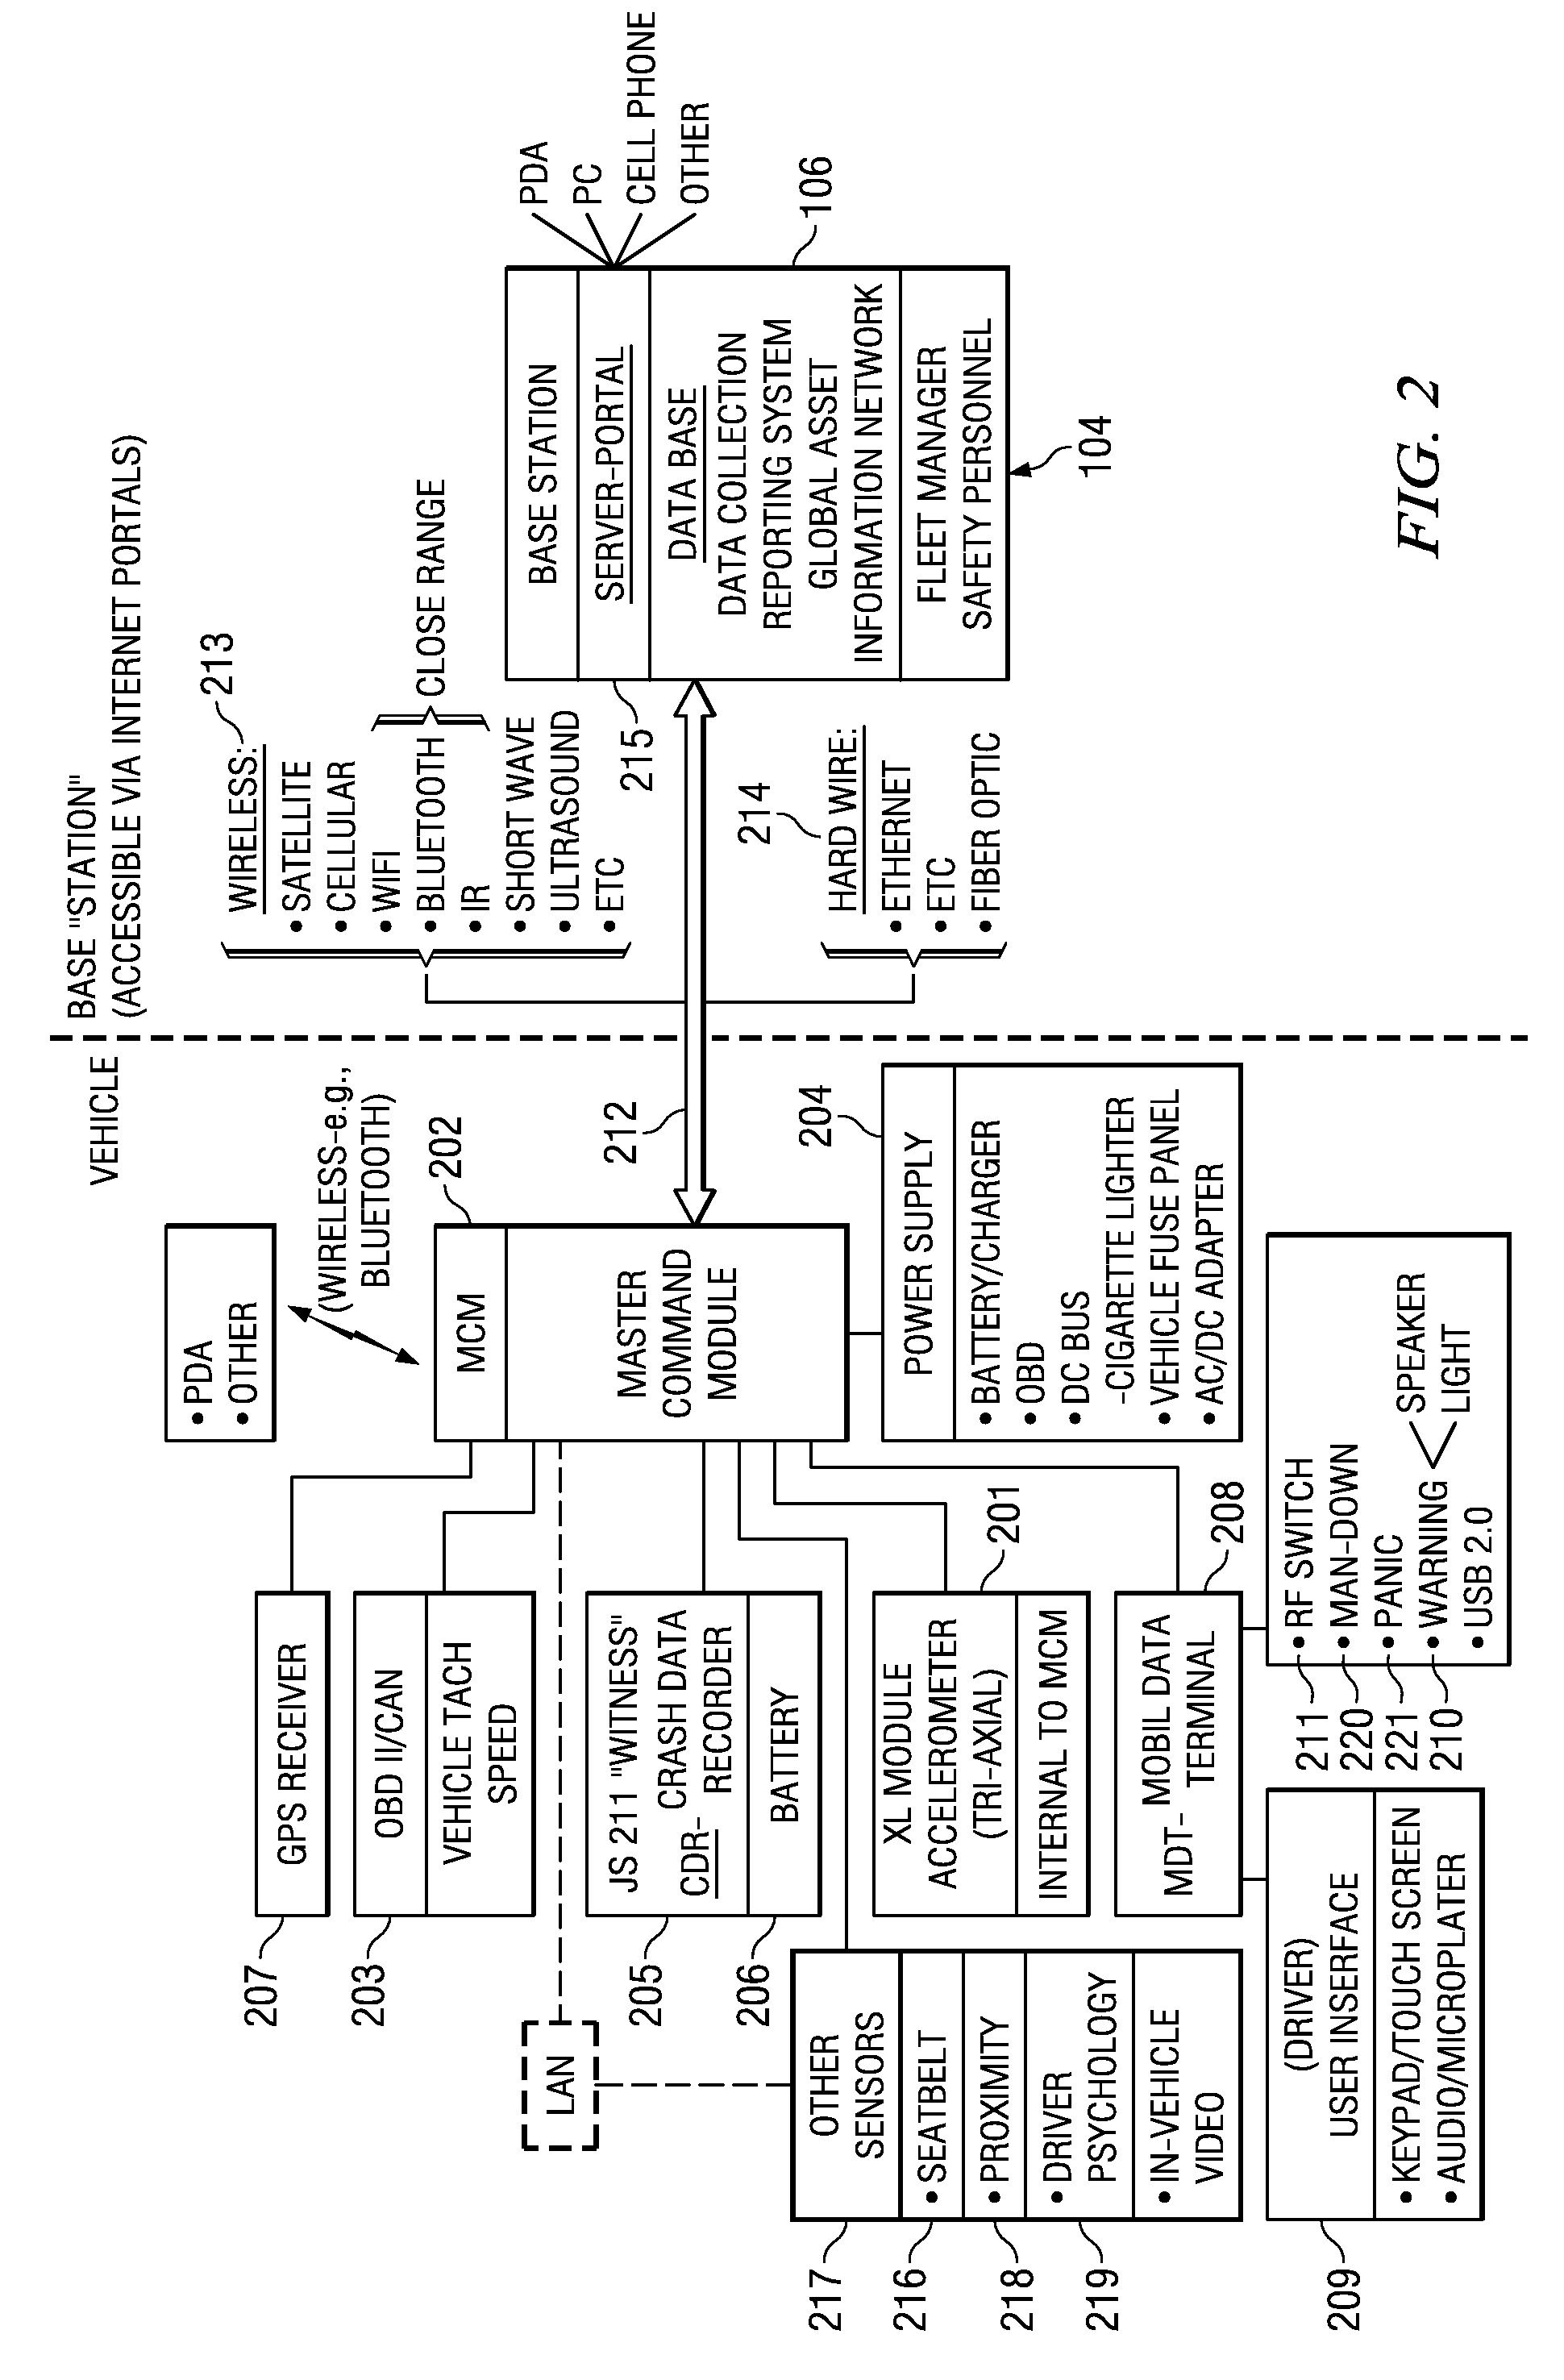 System and Method for Automatically Registering a Vehicle Monitoring Device